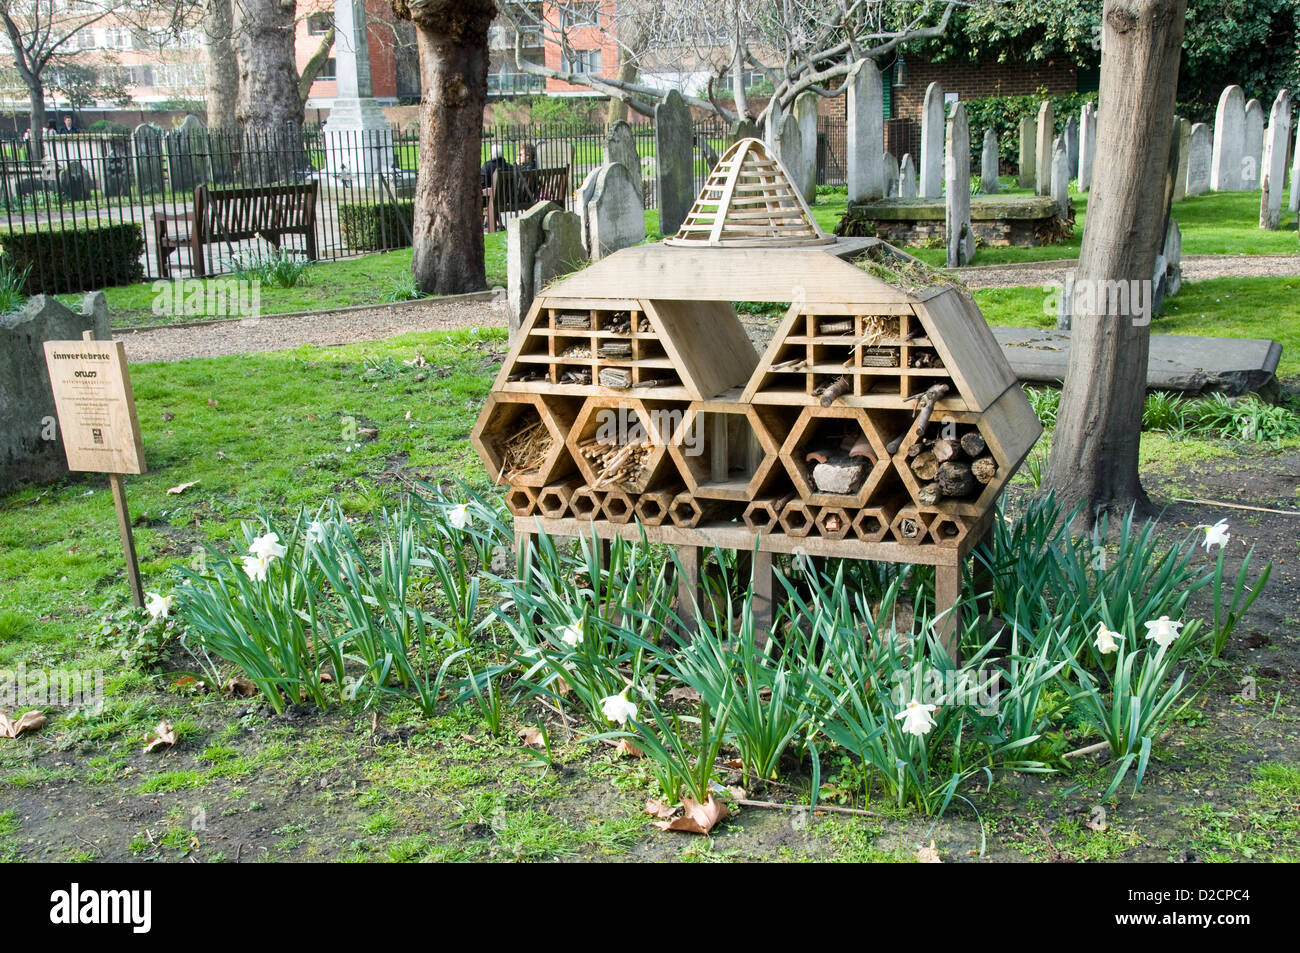 Invertebrate Bug Hotel or Insect House  situated amongst gravestones, Bunhill Fields Burial Ground Stock Photo